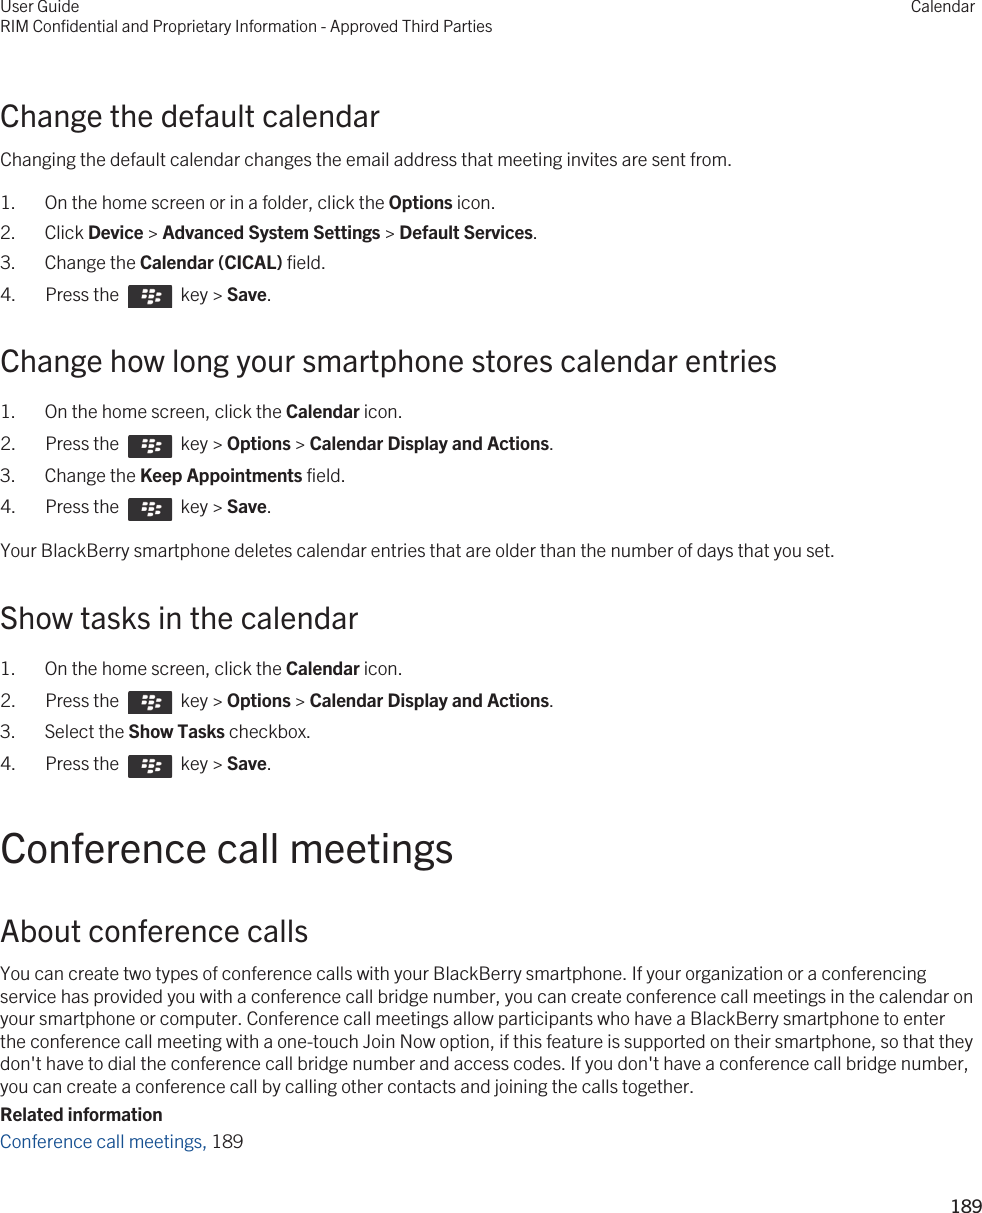 Change the default calendarChanging the default calendar changes the email address that meeting invites are sent from.1. On the home screen or in a folder, click the Options icon.2. Click Device &gt; Advanced System Settings &gt; Default Services.3. Change the Calendar (CICAL) field.4.  Press the    key &gt; Save. Change how long your smartphone stores calendar entries1. On the home screen, click the Calendar icon.2.  Press the    key &gt; Options &gt; Calendar Display and Actions. 3. Change the Keep Appointments field.4.  Press the    key &gt; Save. Your BlackBerry smartphone deletes calendar entries that are older than the number of days that you set.Show tasks in the calendar1. On the home screen, click the Calendar icon.2.  Press the    key &gt; Options &gt; Calendar Display and Actions. 3. Select the Show Tasks checkbox.4.  Press the    key &gt; Save. Conference call meetingsAbout conference callsYou can create two types of conference calls with your BlackBerry smartphone. If your organization or a conferencing service has provided you with a conference call bridge number, you can create conference call meetings in the calendar on your smartphone or computer. Conference call meetings allow participants who have a BlackBerry smartphone to enter the conference call meeting with a one-touch Join Now option, if this feature is supported on their smartphone, so that they don&apos;t have to dial the conference call bridge number and access codes. If you don&apos;t have a conference call bridge number, you can create a conference call by calling other contacts and joining the calls together.Related informationConference call meetings, 189 User GuideRIM Confidential and Proprietary Information - Approved Third PartiesCalendar189 